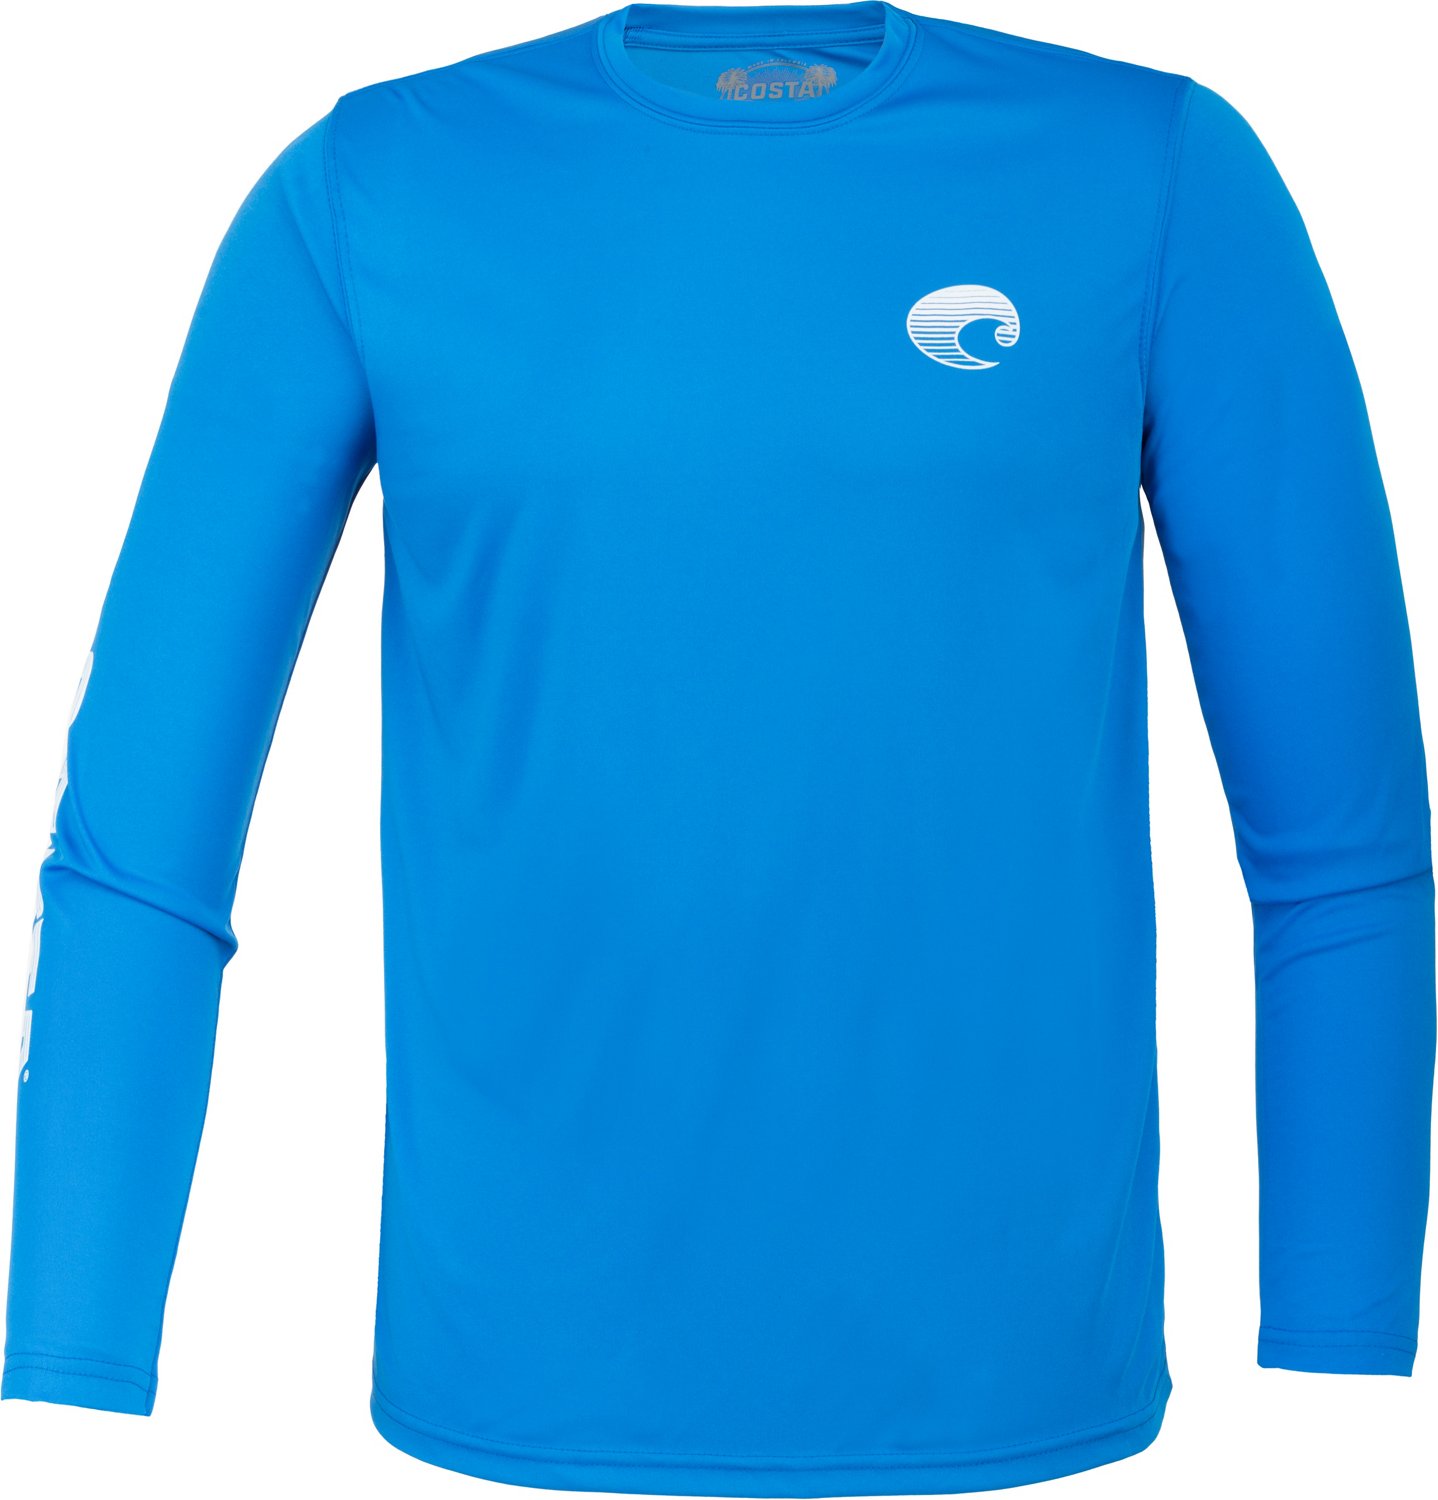  Costa Del Mar mens Tech Crew Performance Long Sleeve Shirt,  Arctic Blue, Small US : Clothing, Shoes & Jewelry